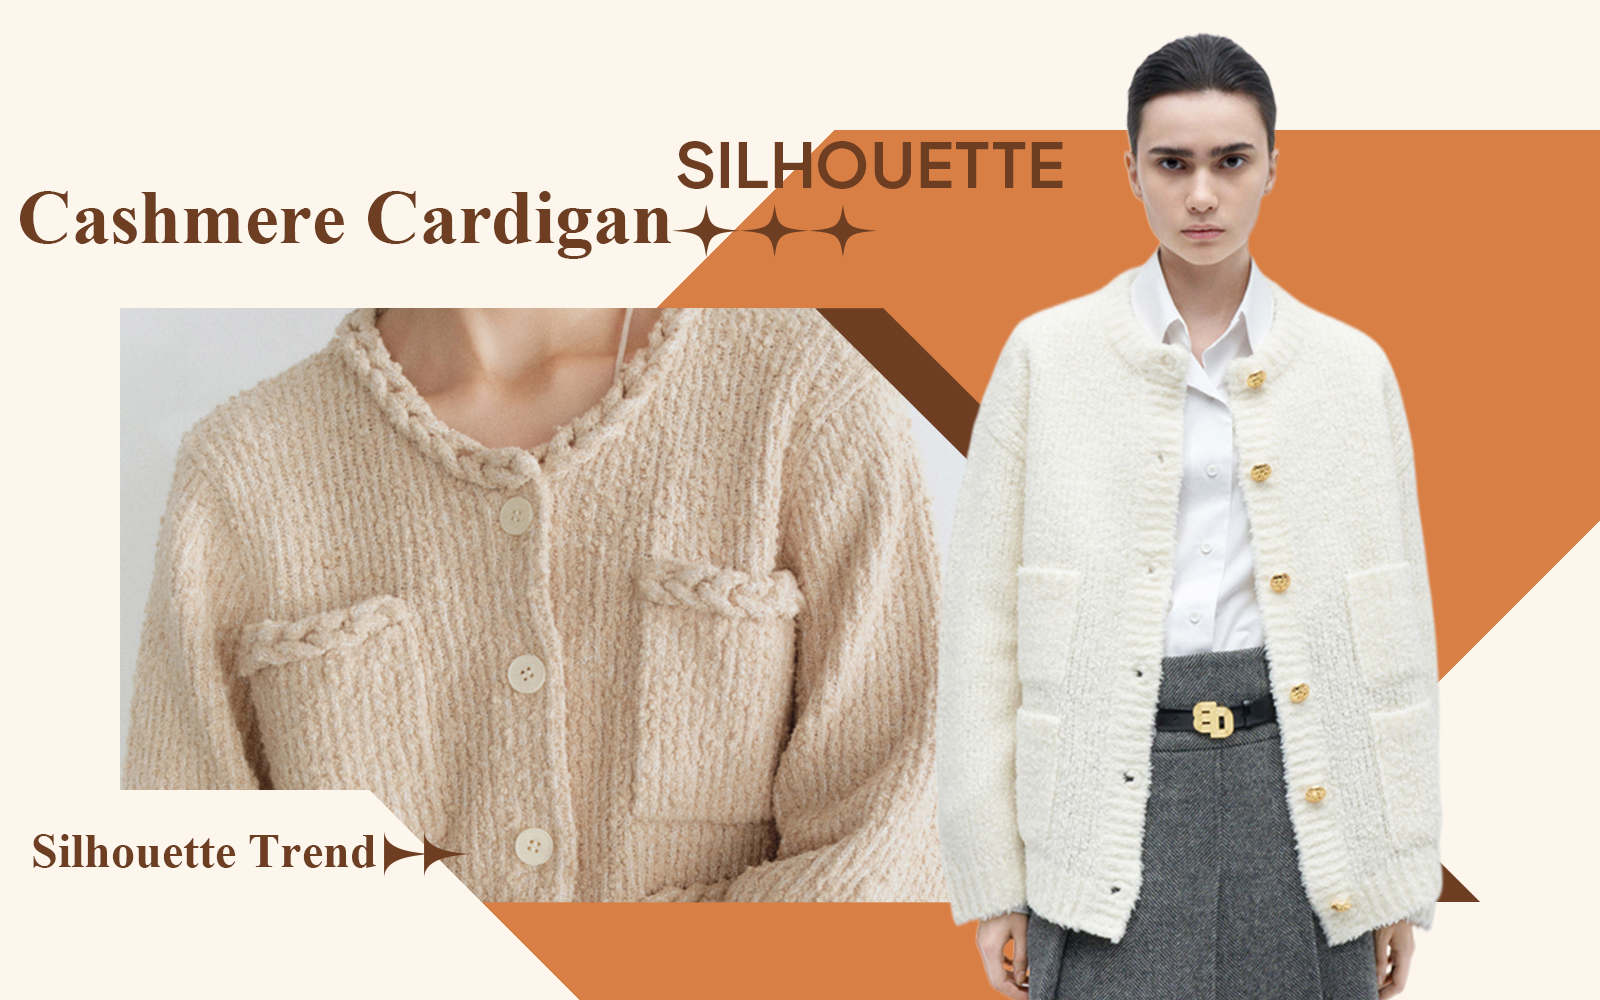 Cashmere Cardigan -- The Silhouette Trend for Women's Knitwear